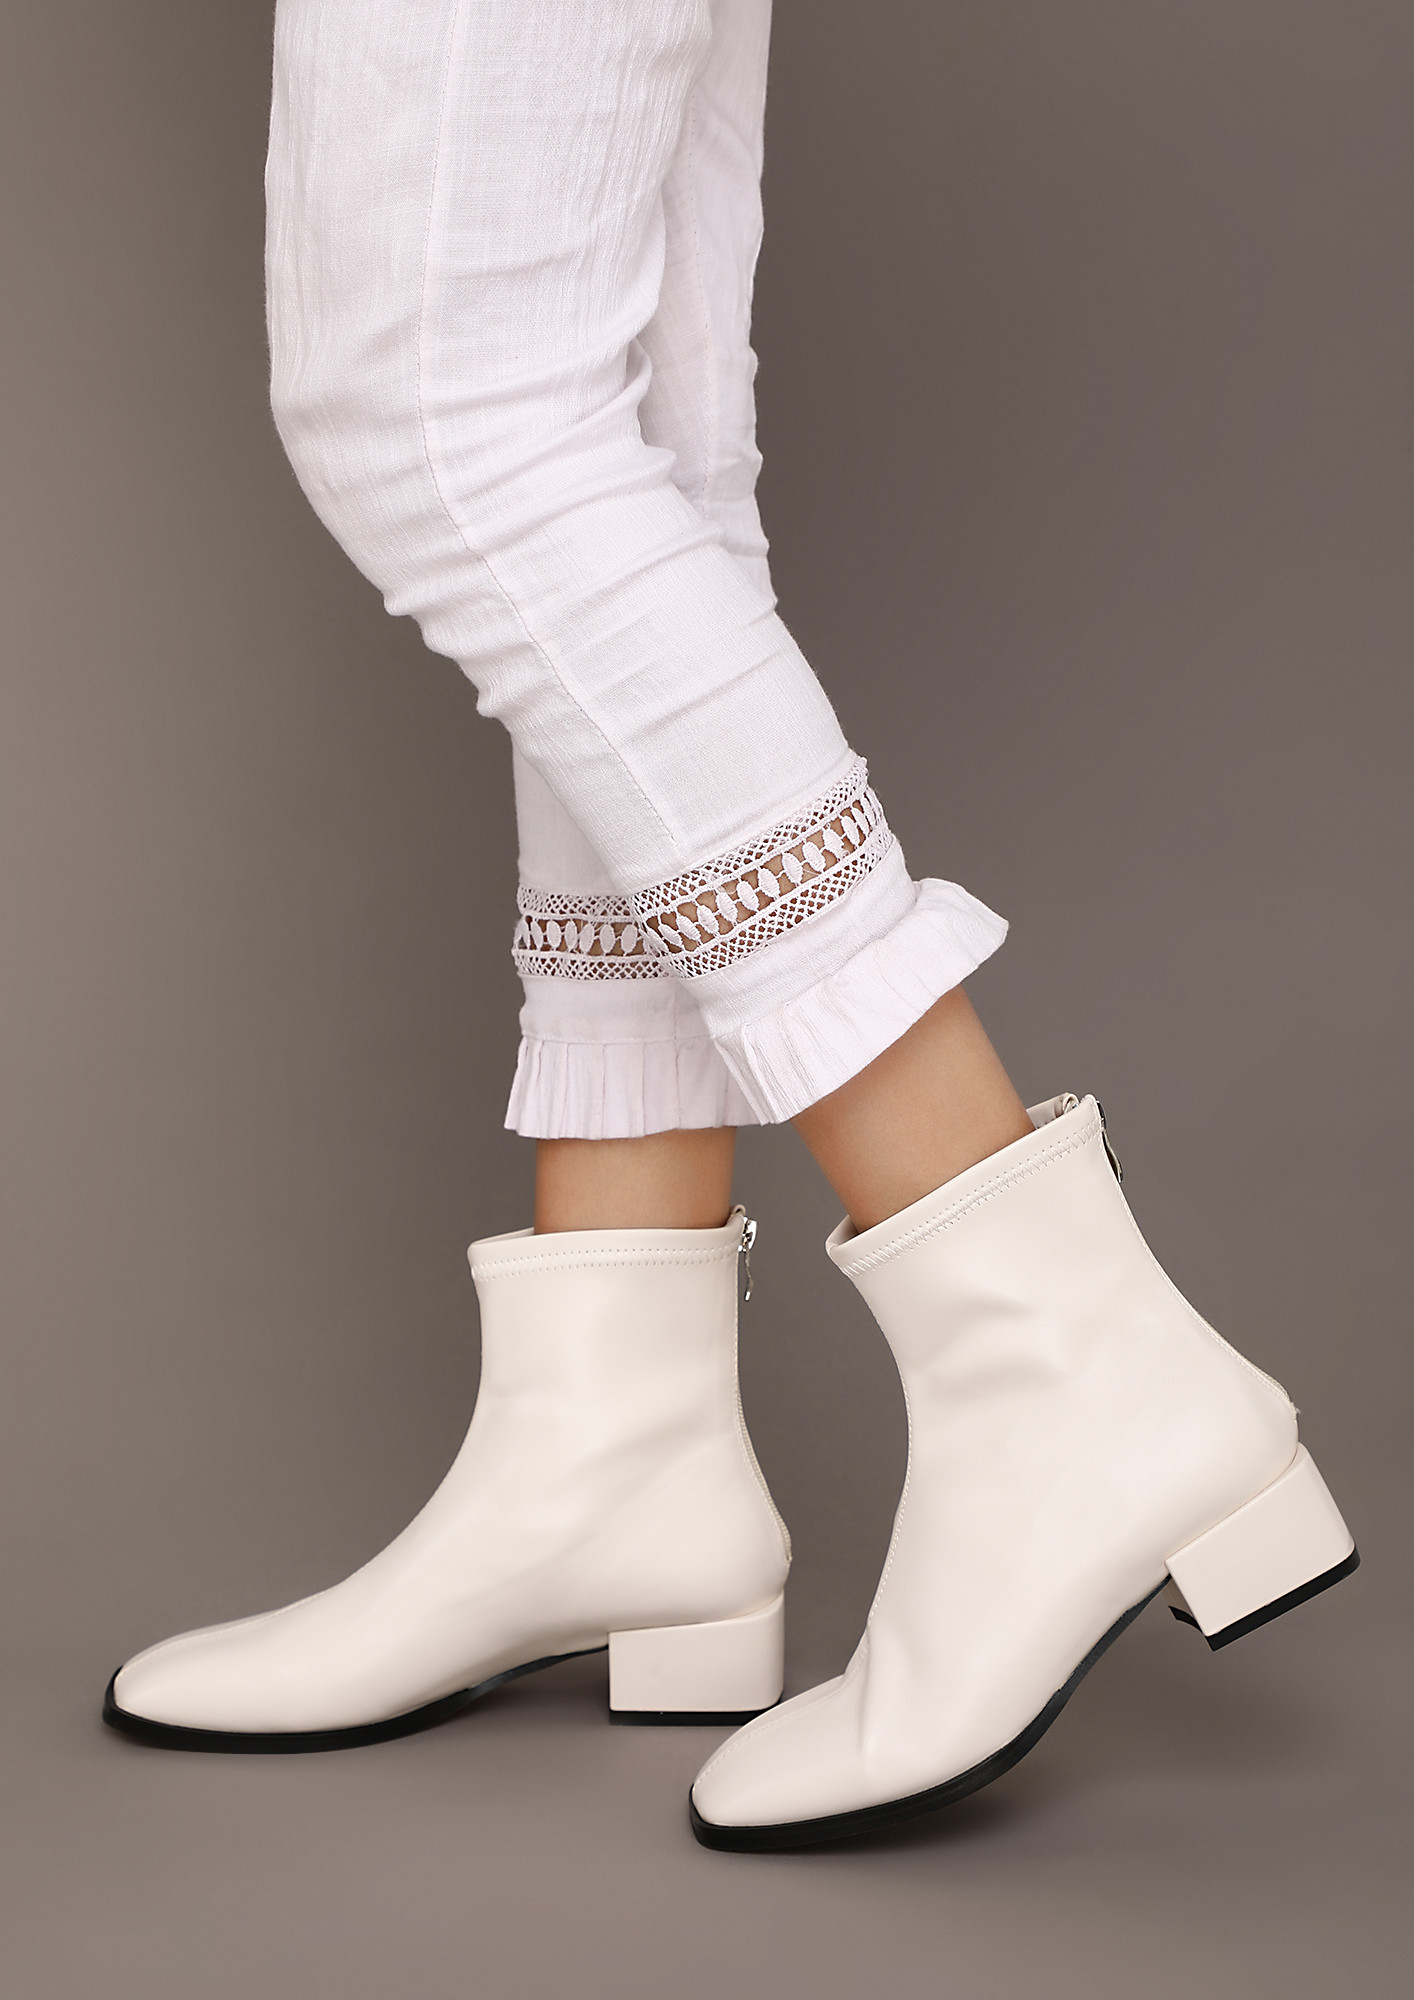 White Boots for Women, White Heeled Boots